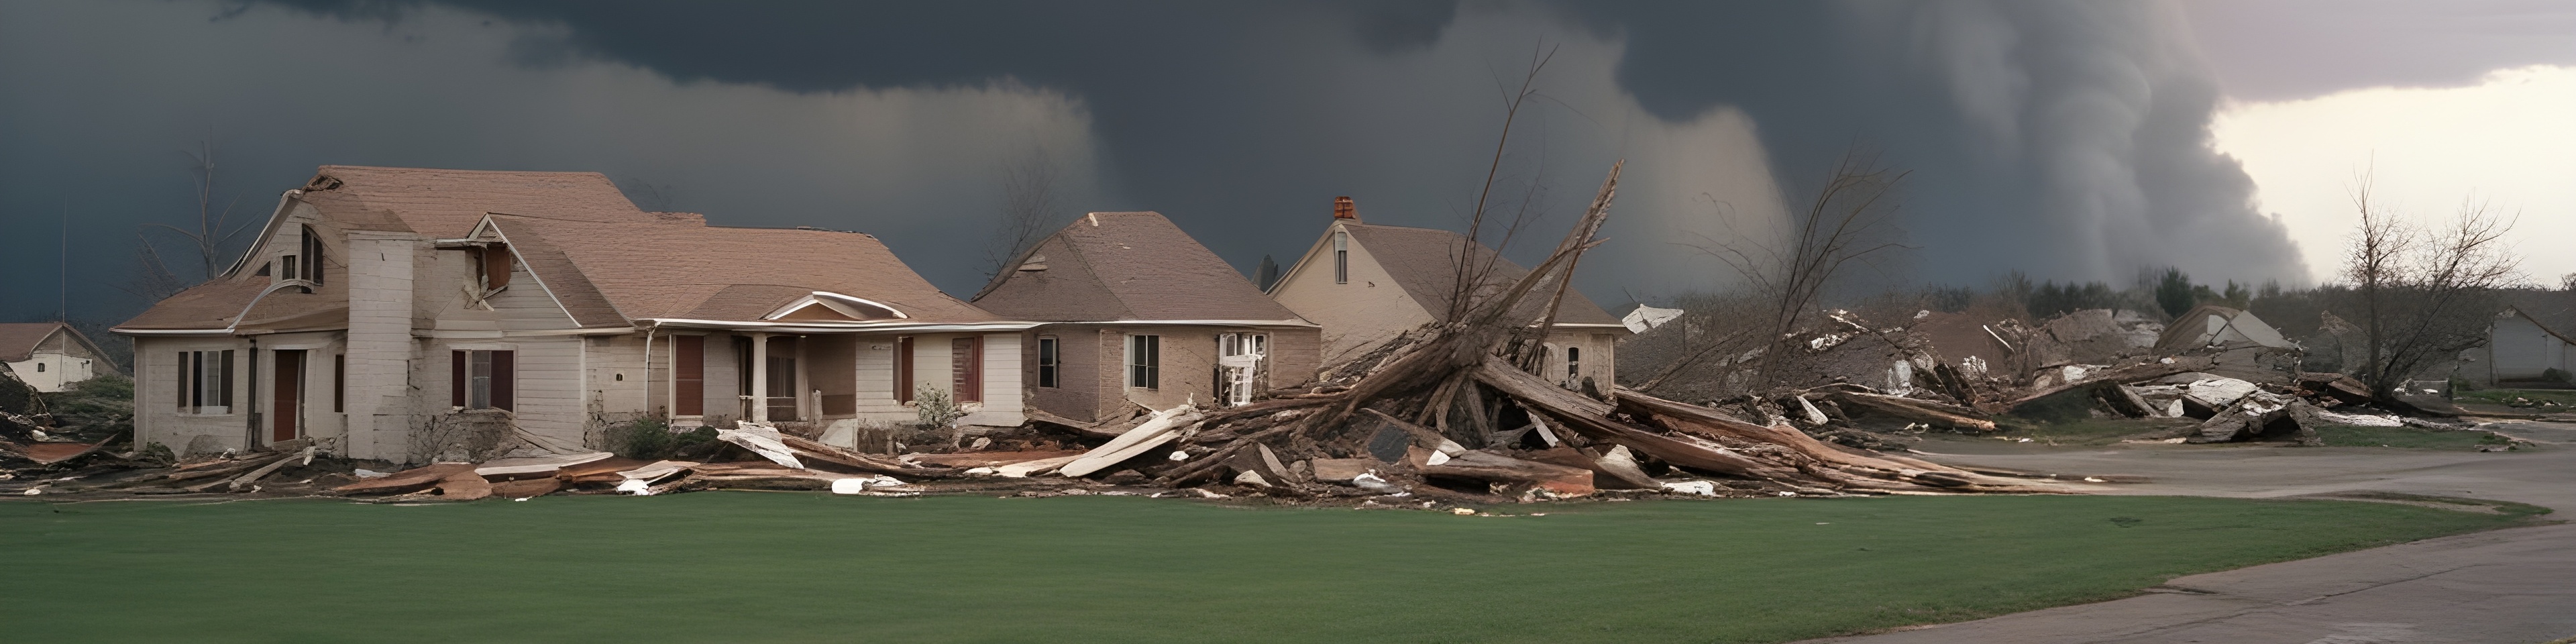 Tornado damage, whirlwind rips up the land